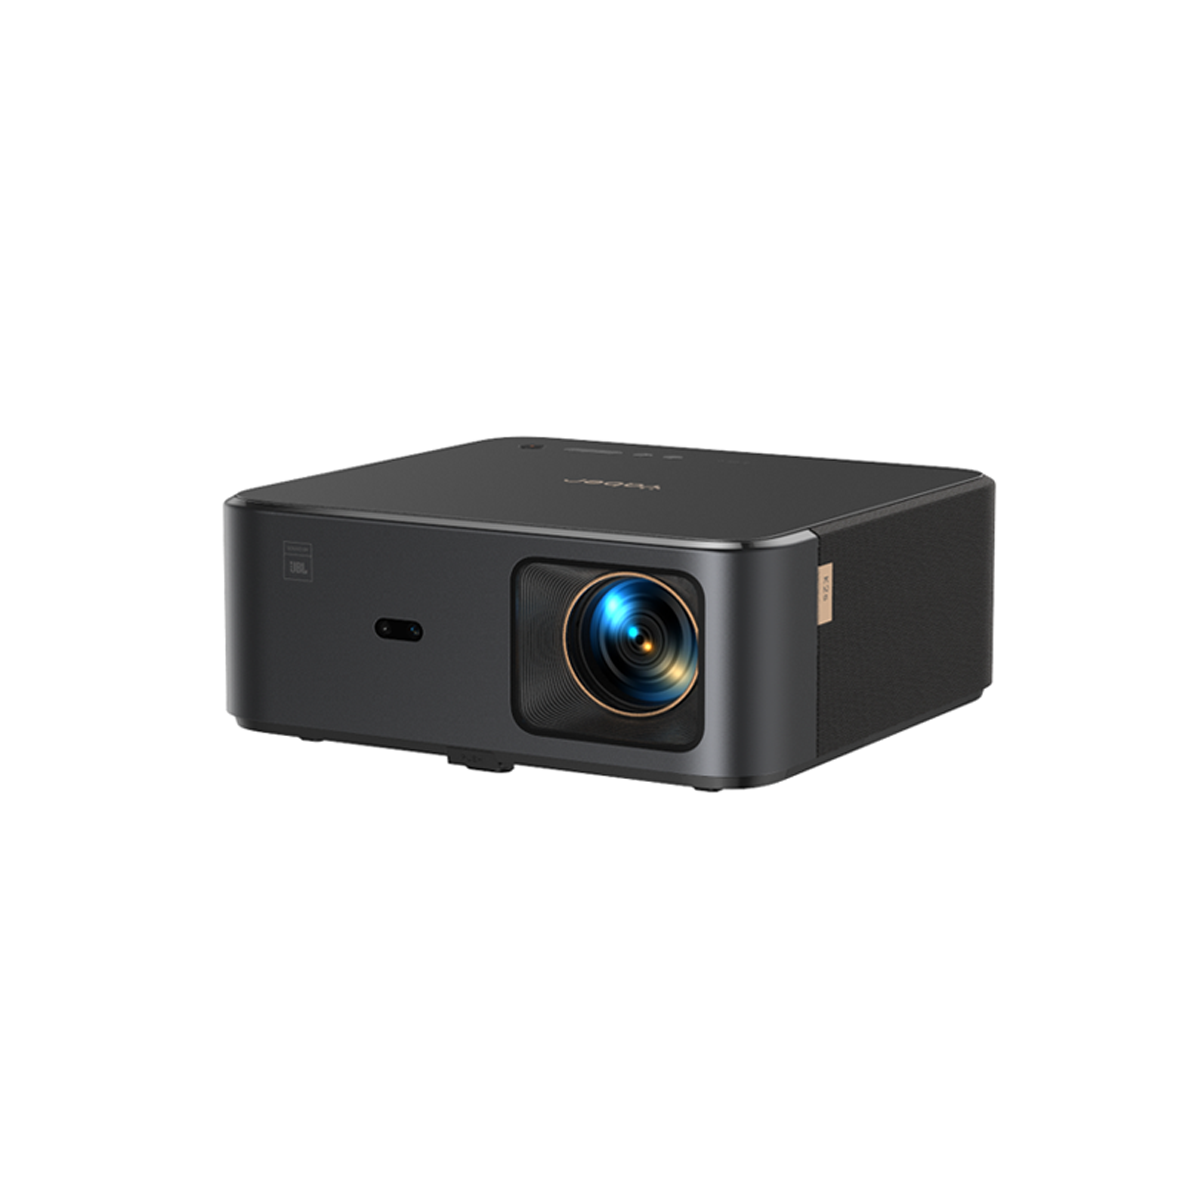 YABER PROJECTOR K2s - YABER Entertainment Projector